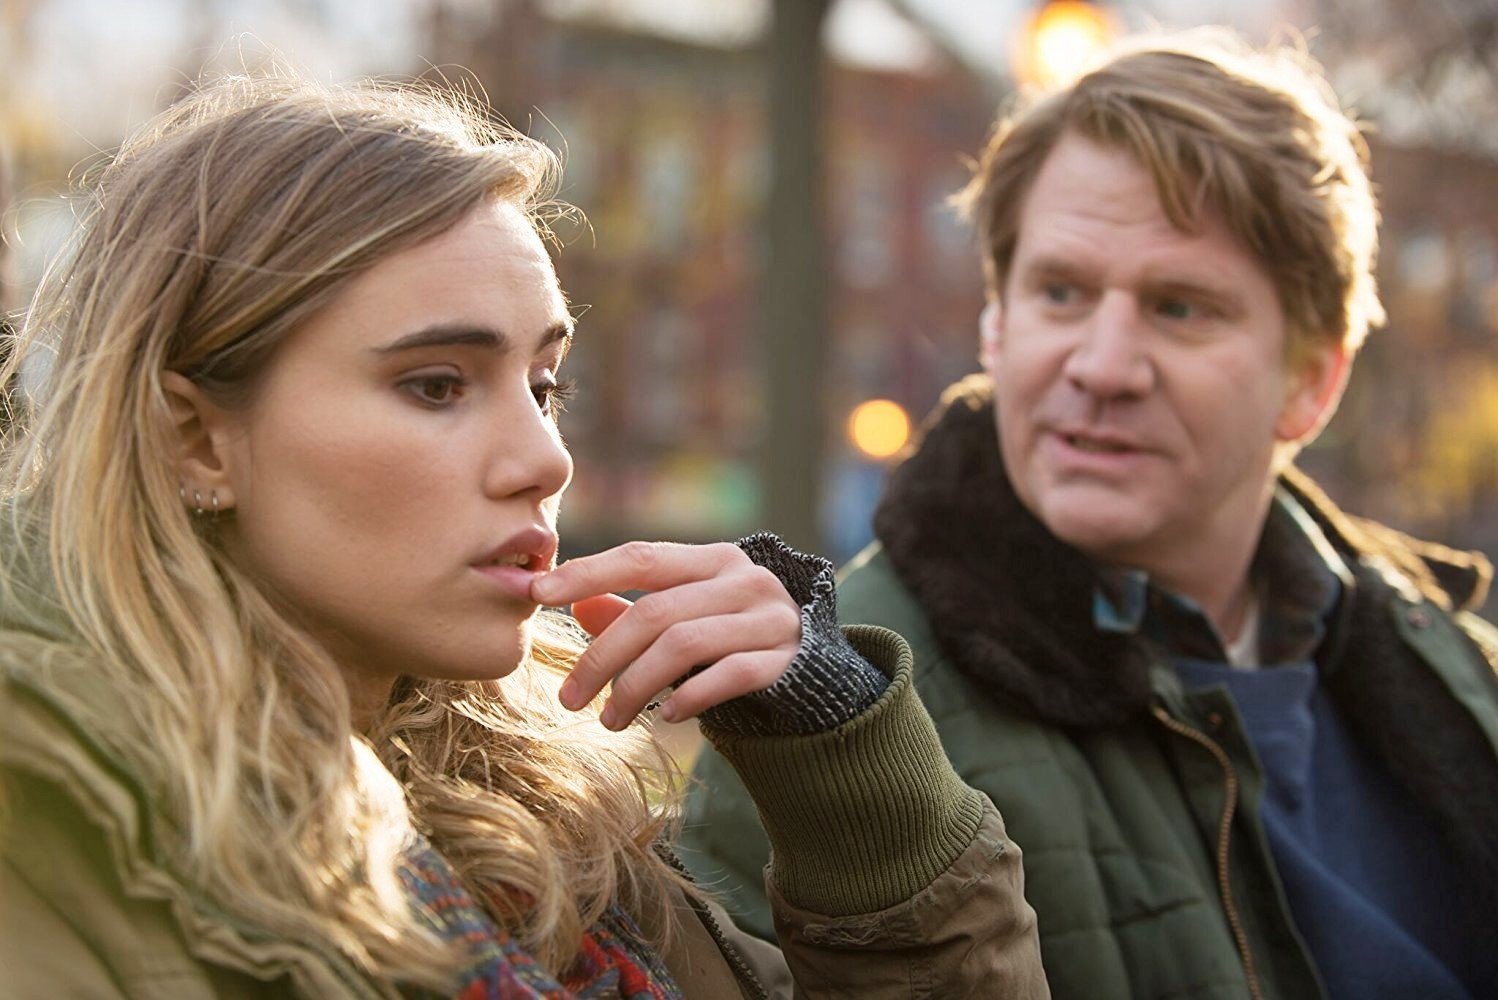 Suki Waterhouse stars as The Girl and Dash Mihok stars as Victor in 308 Ent's The Girl Who Invented Kissing (2017)